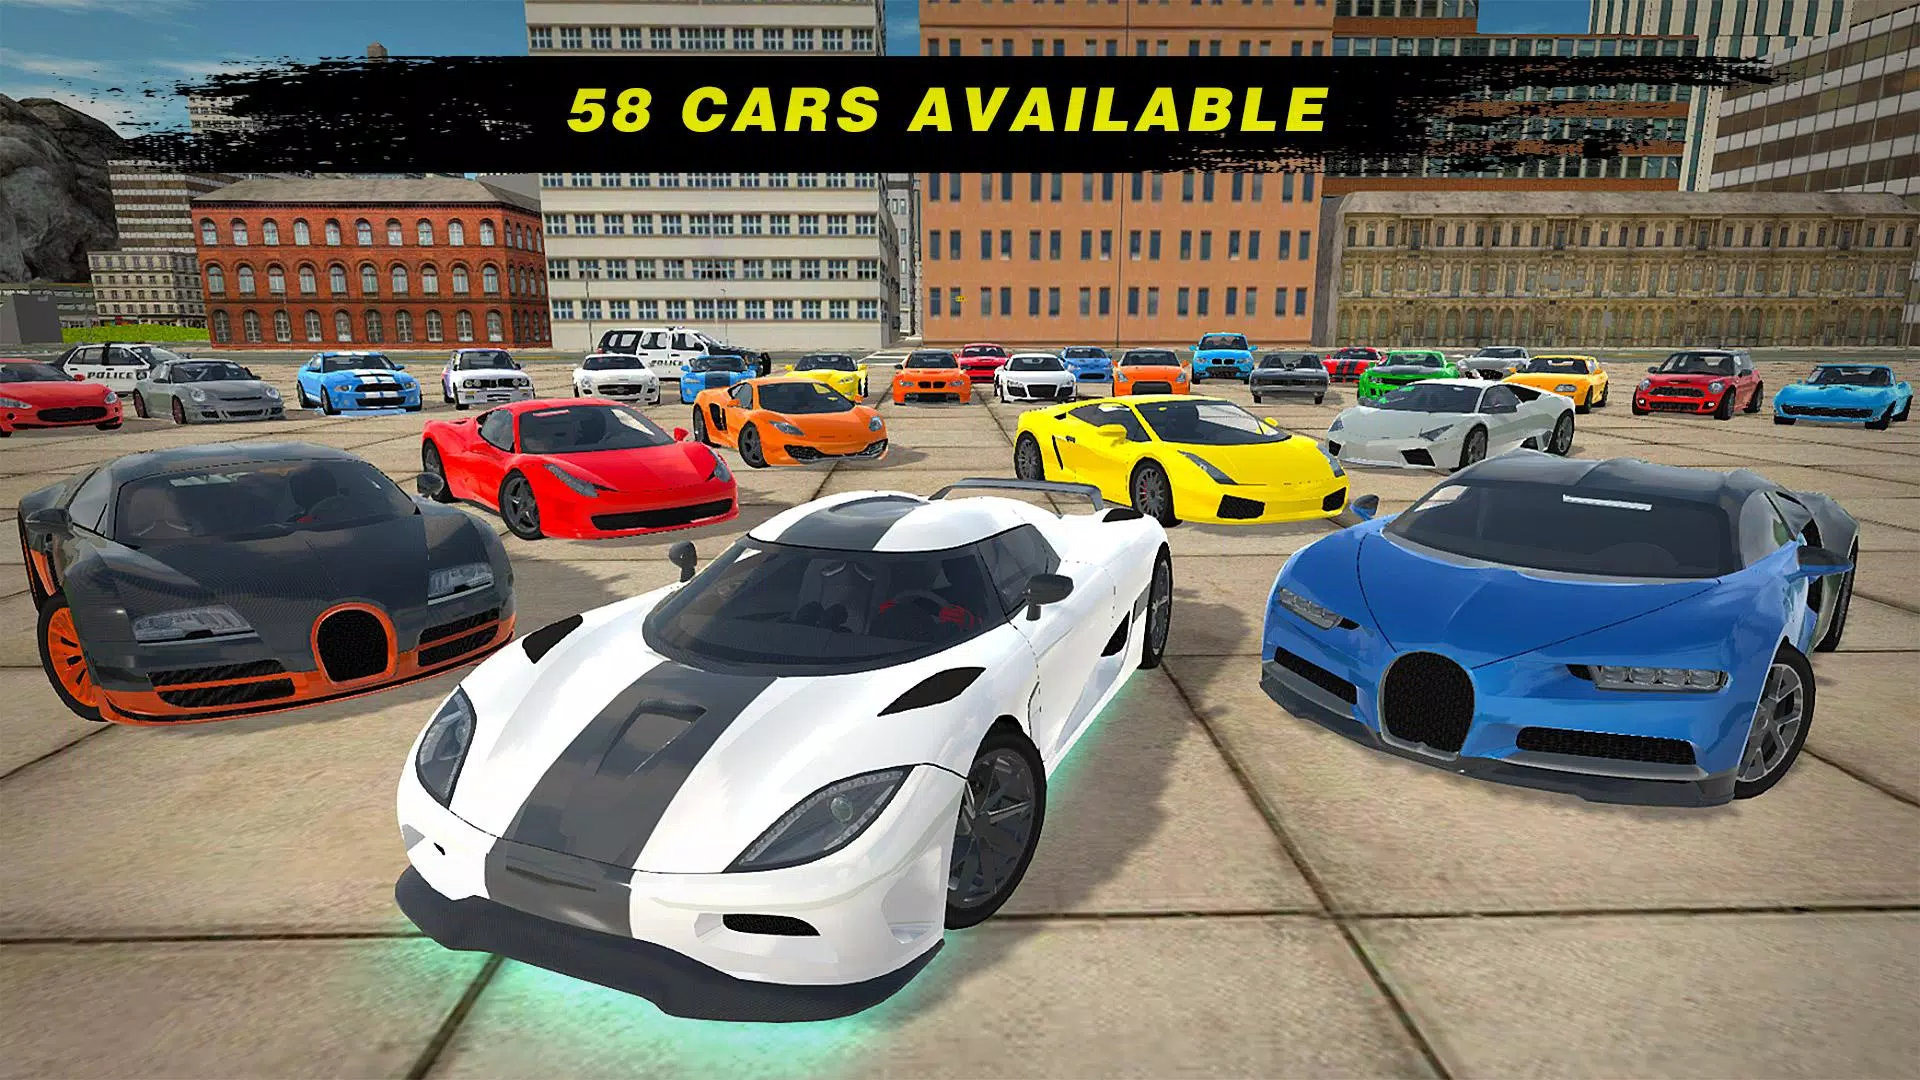 Speed Car Driving Simulator Game for Android - Download